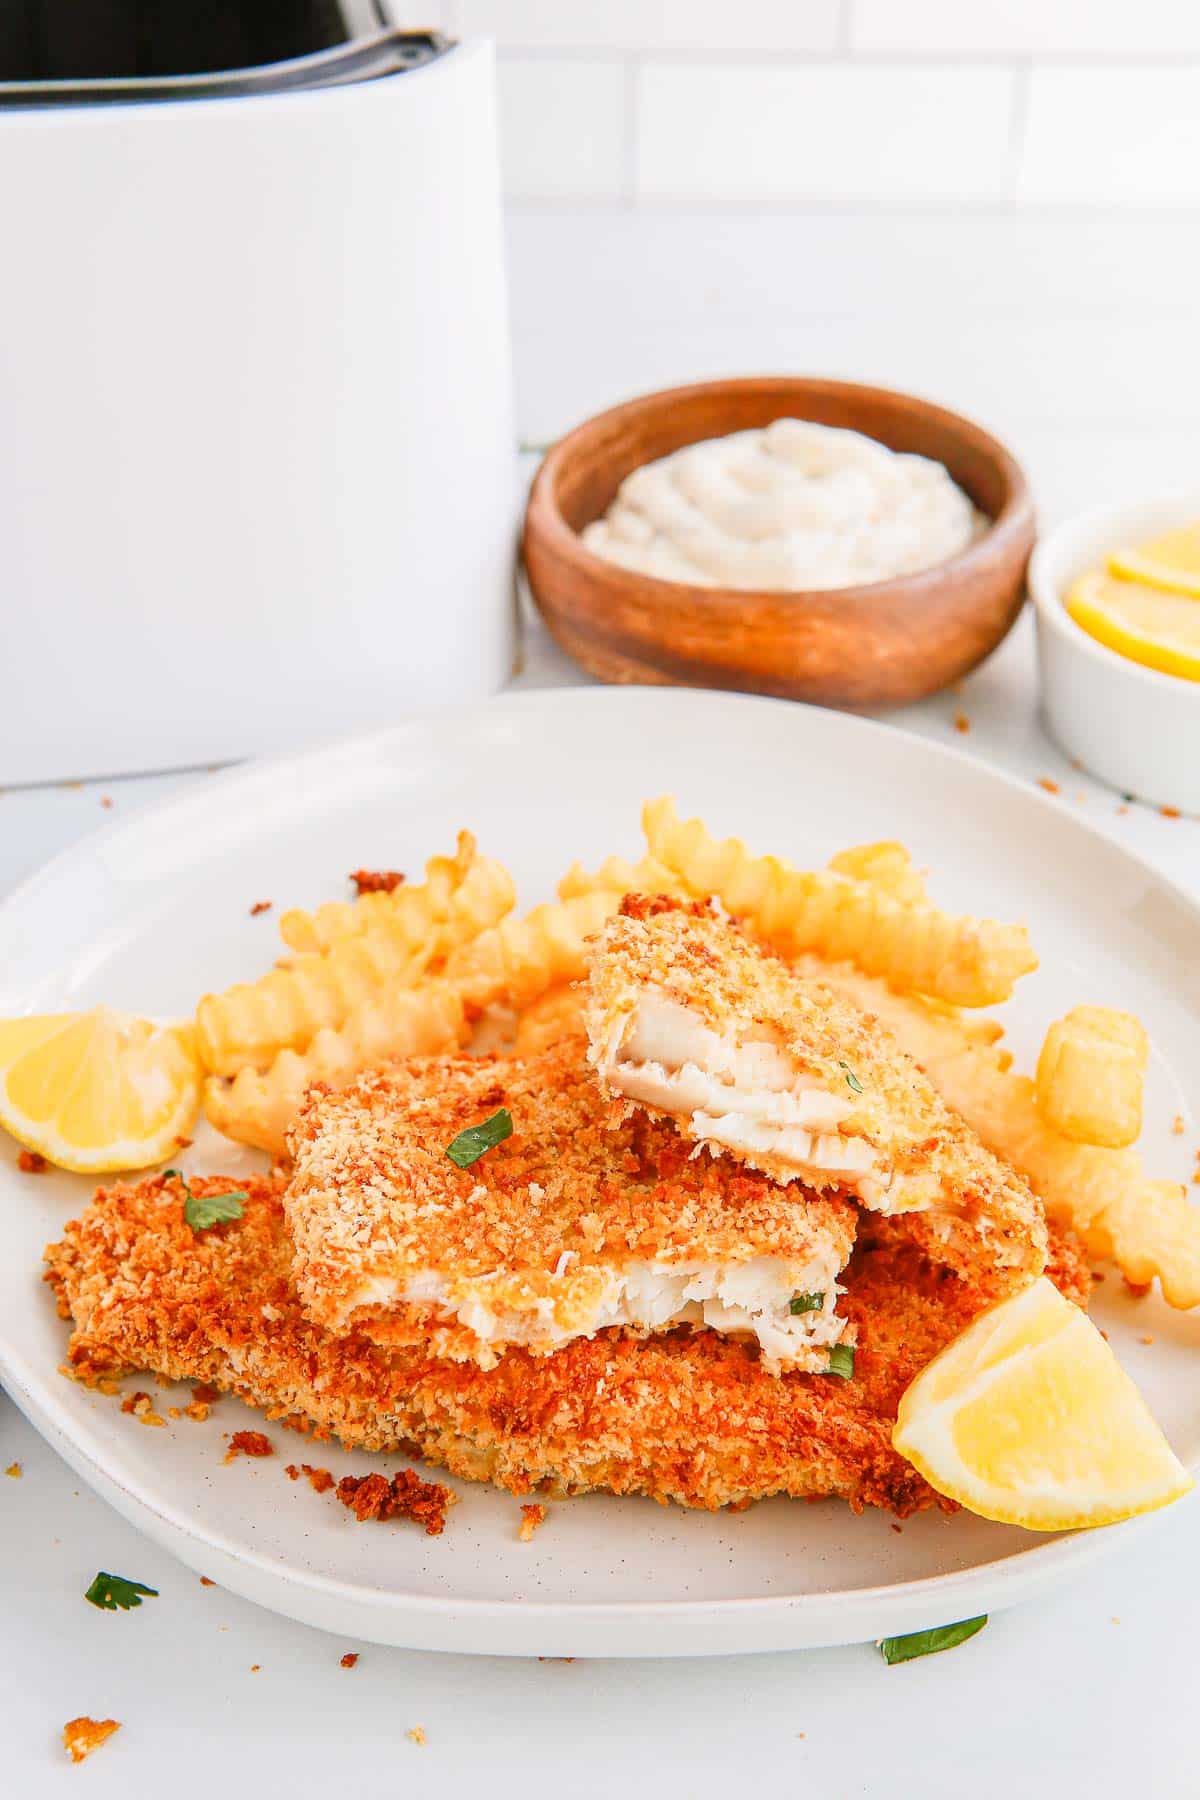 breaded fish fillets with fries and lemon wedges in front of a bowl of mayonnaise, a bowl of lemon wedges and an air fryer basket